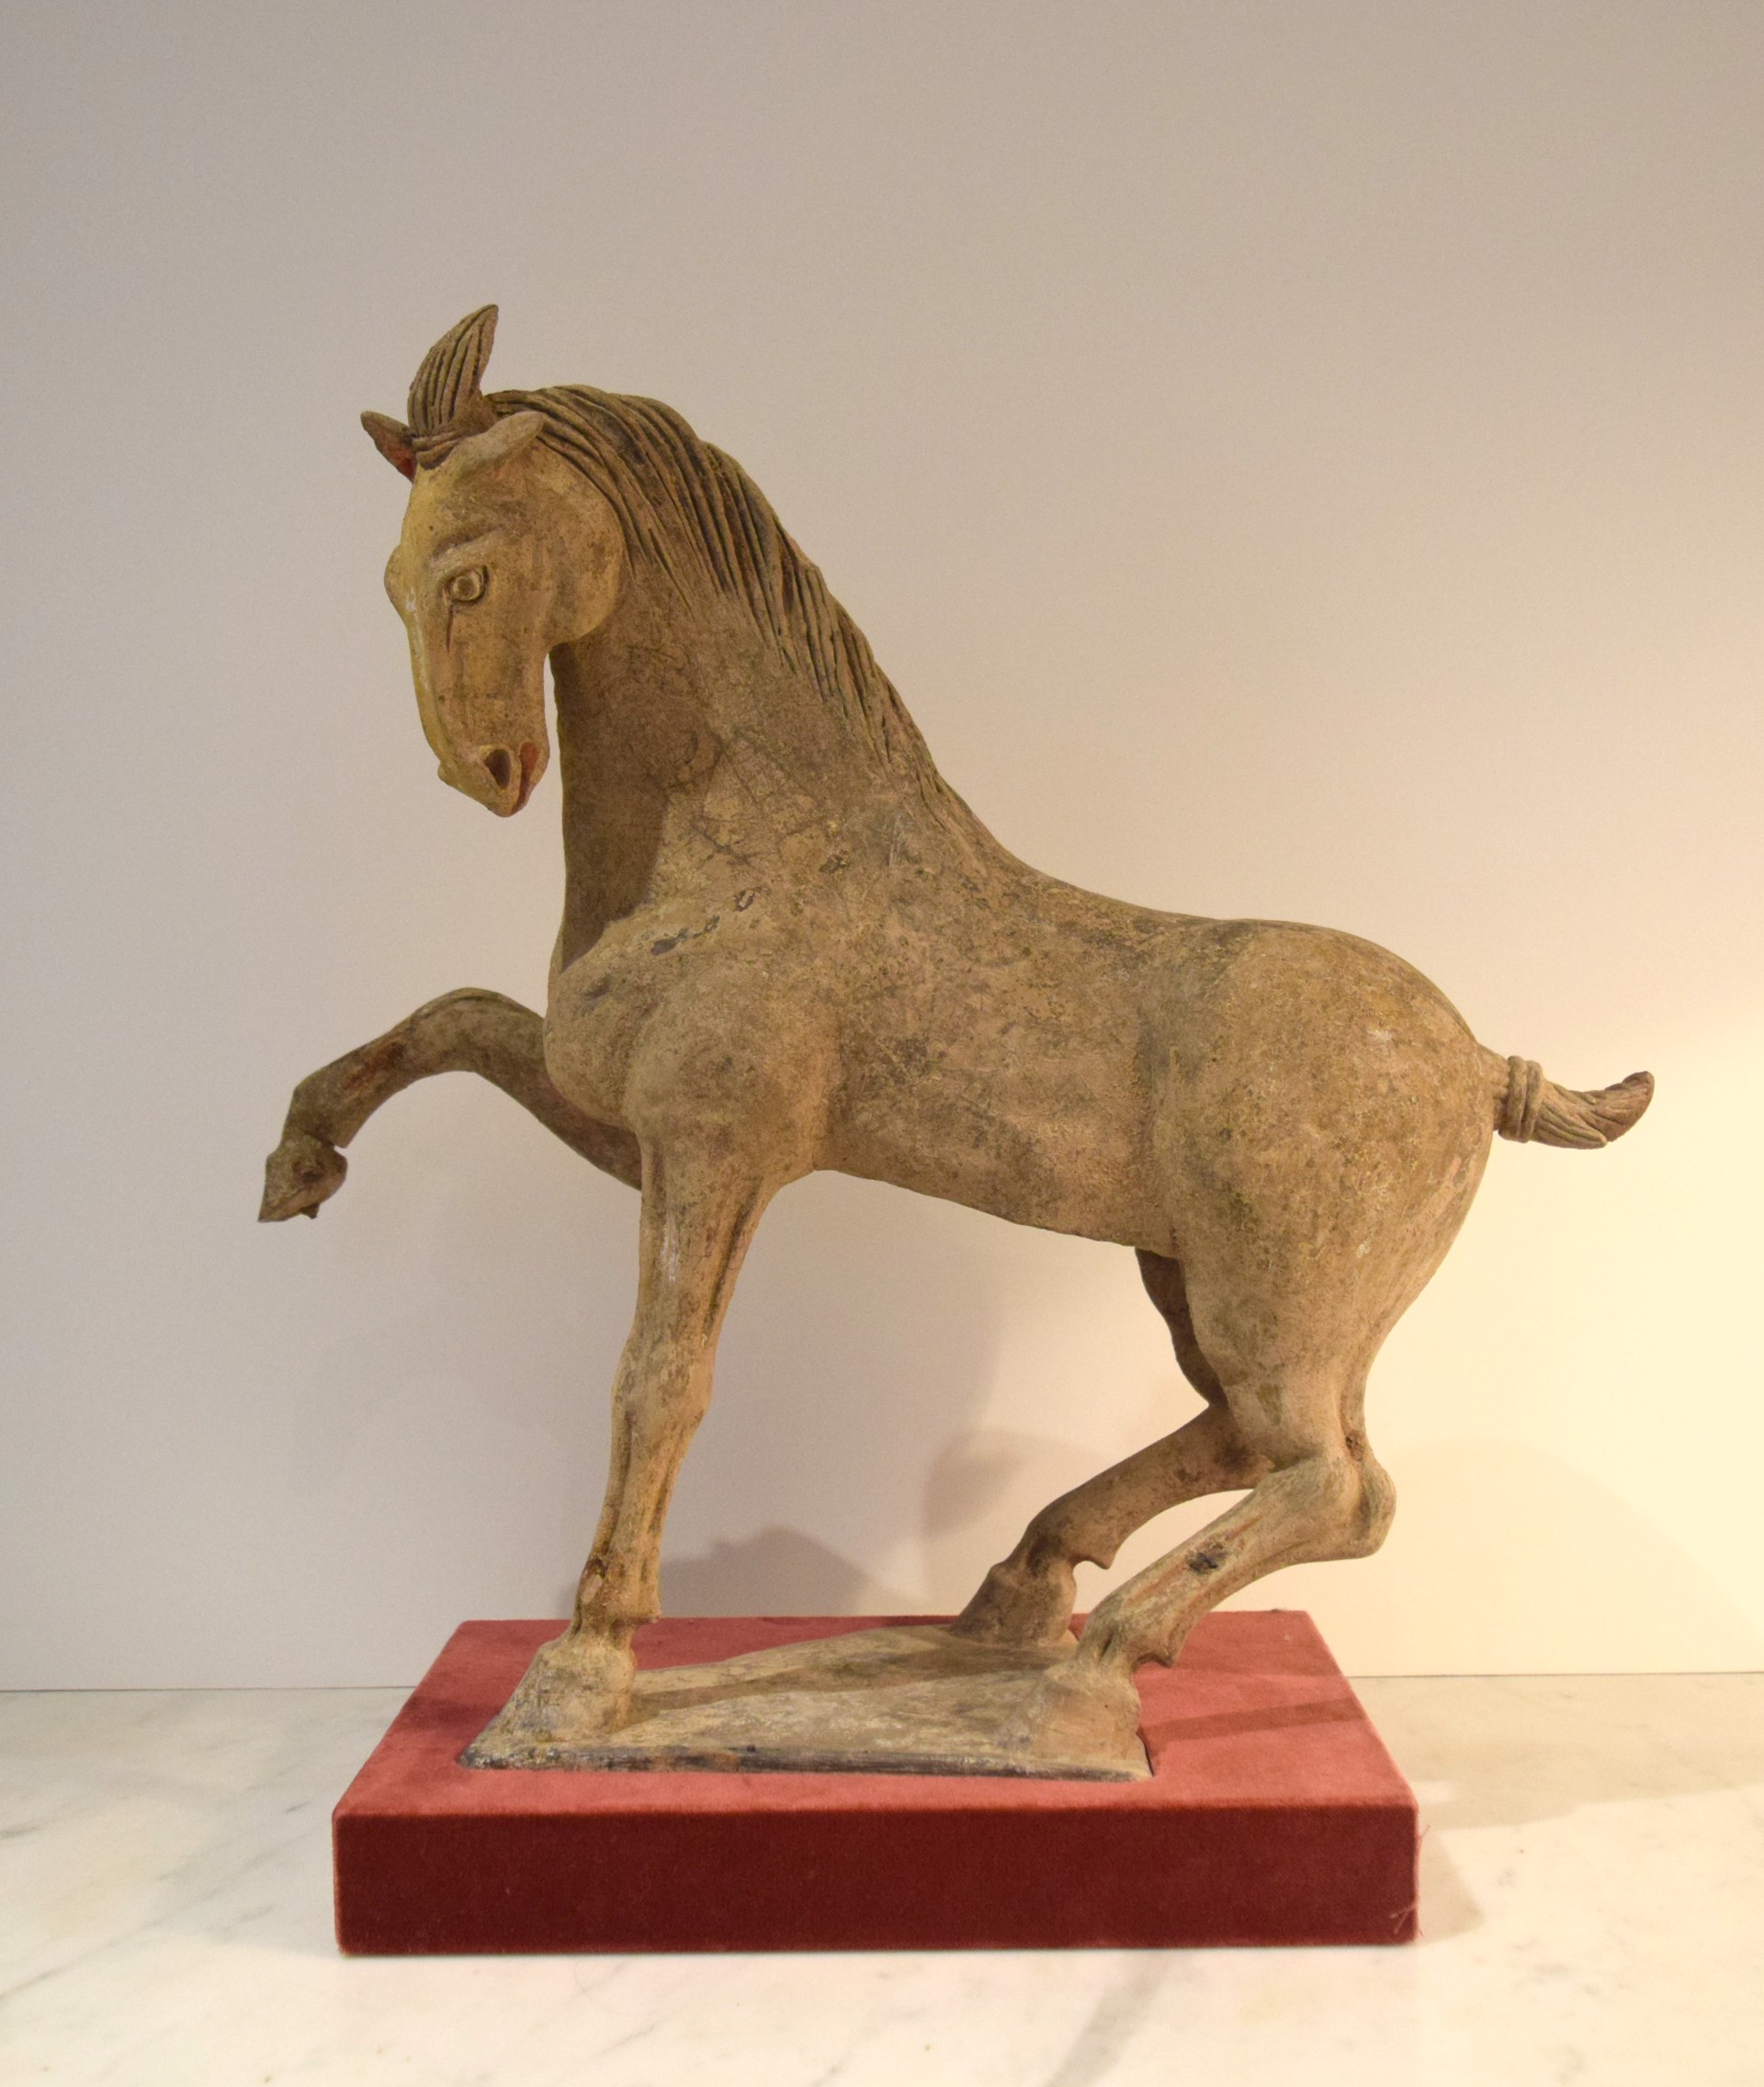 POTTERY FIGURE OF A PRANCING HORSE